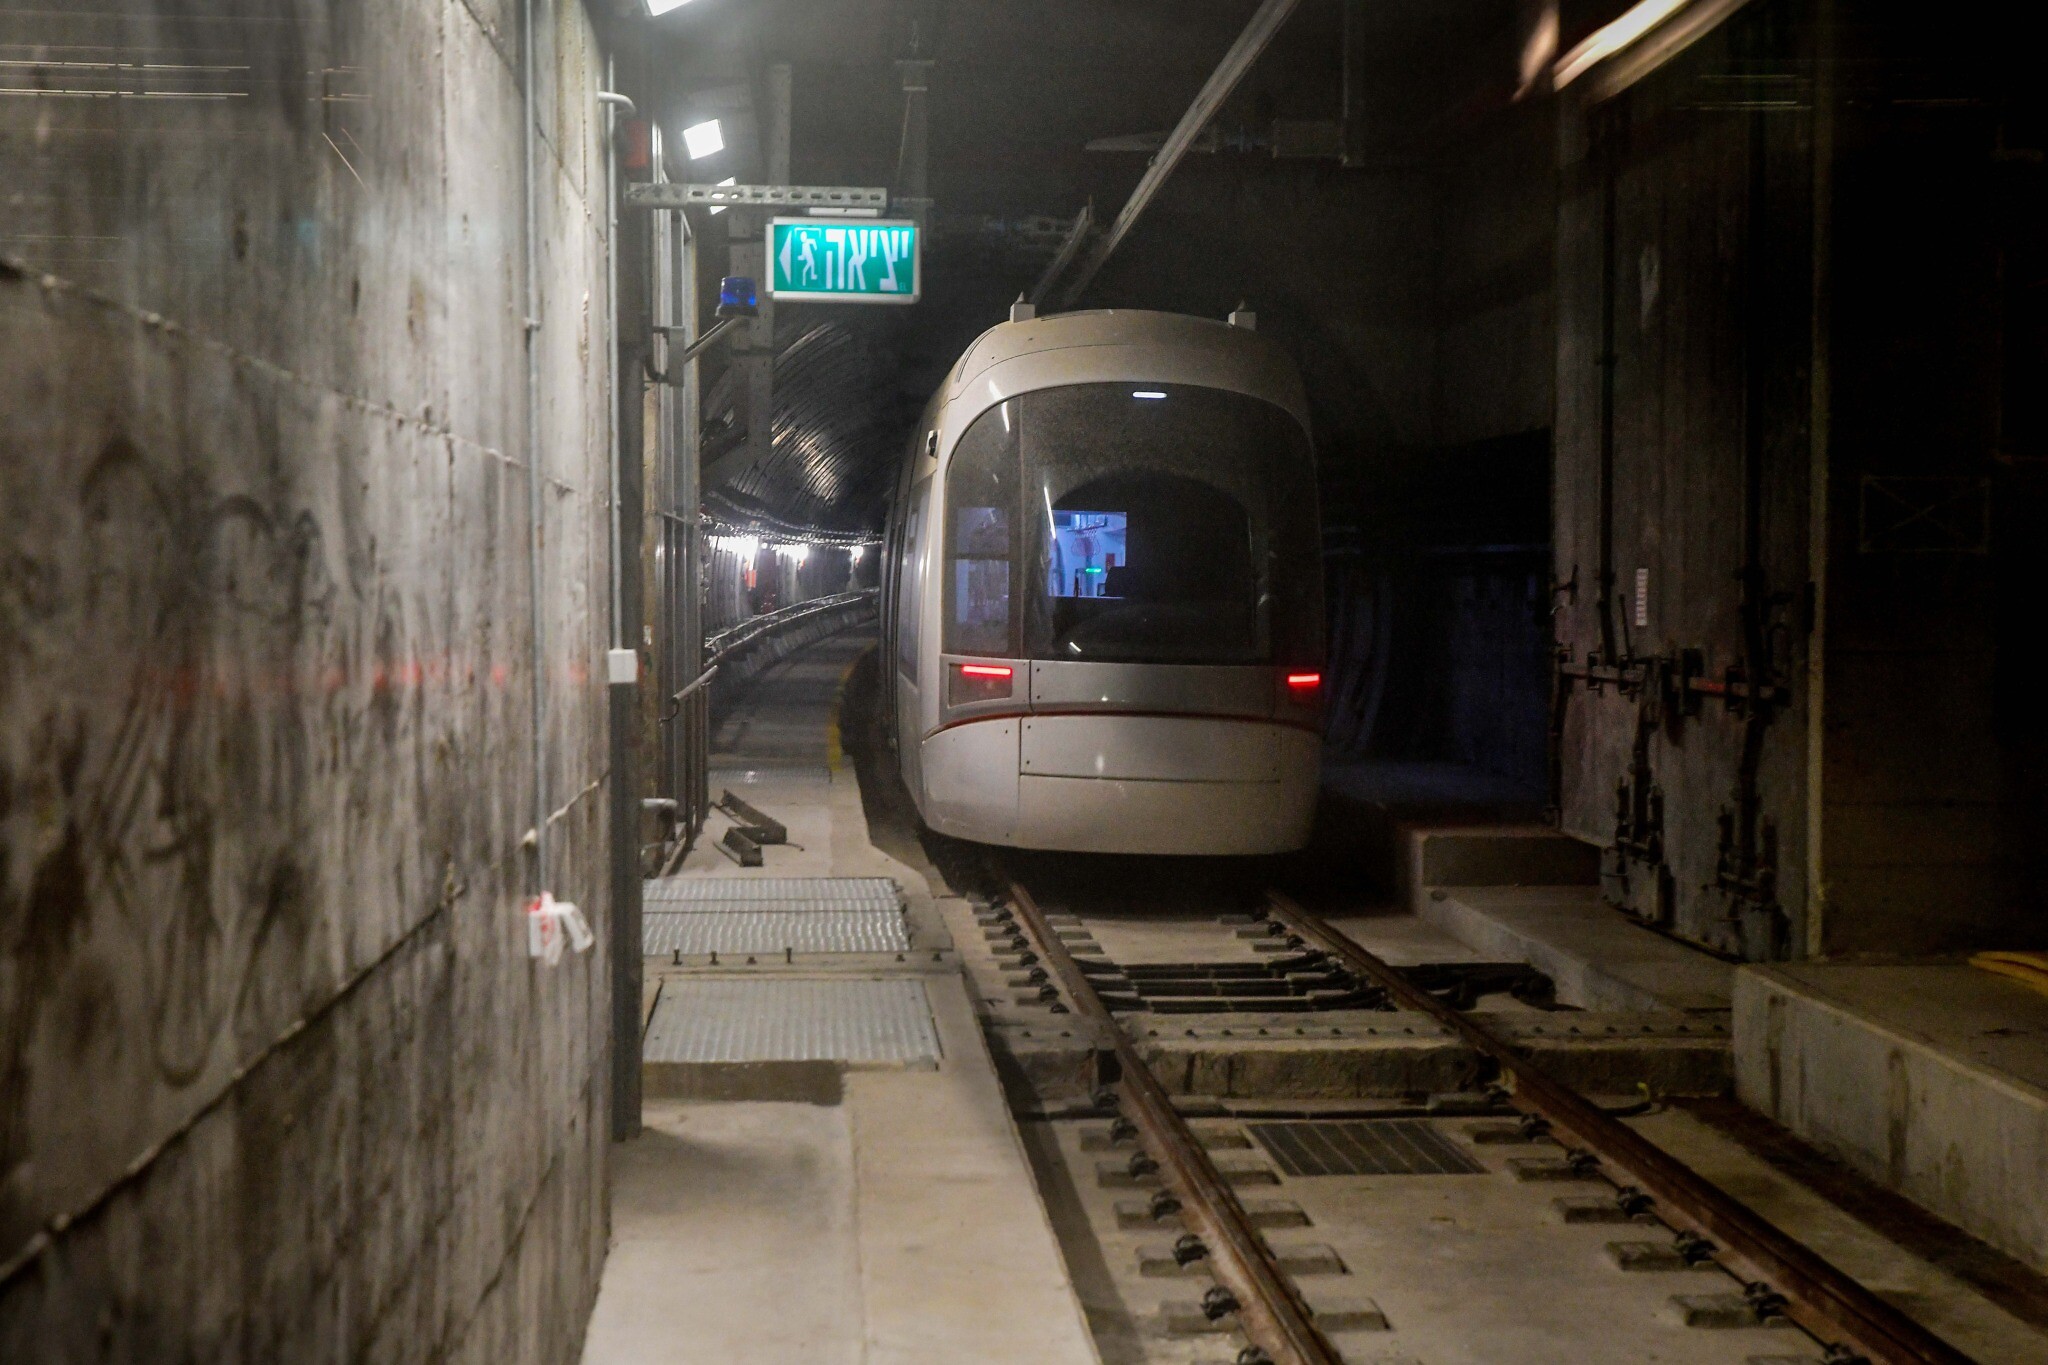 After innumerable delays, first Tel Aviv light rail line set to open ...